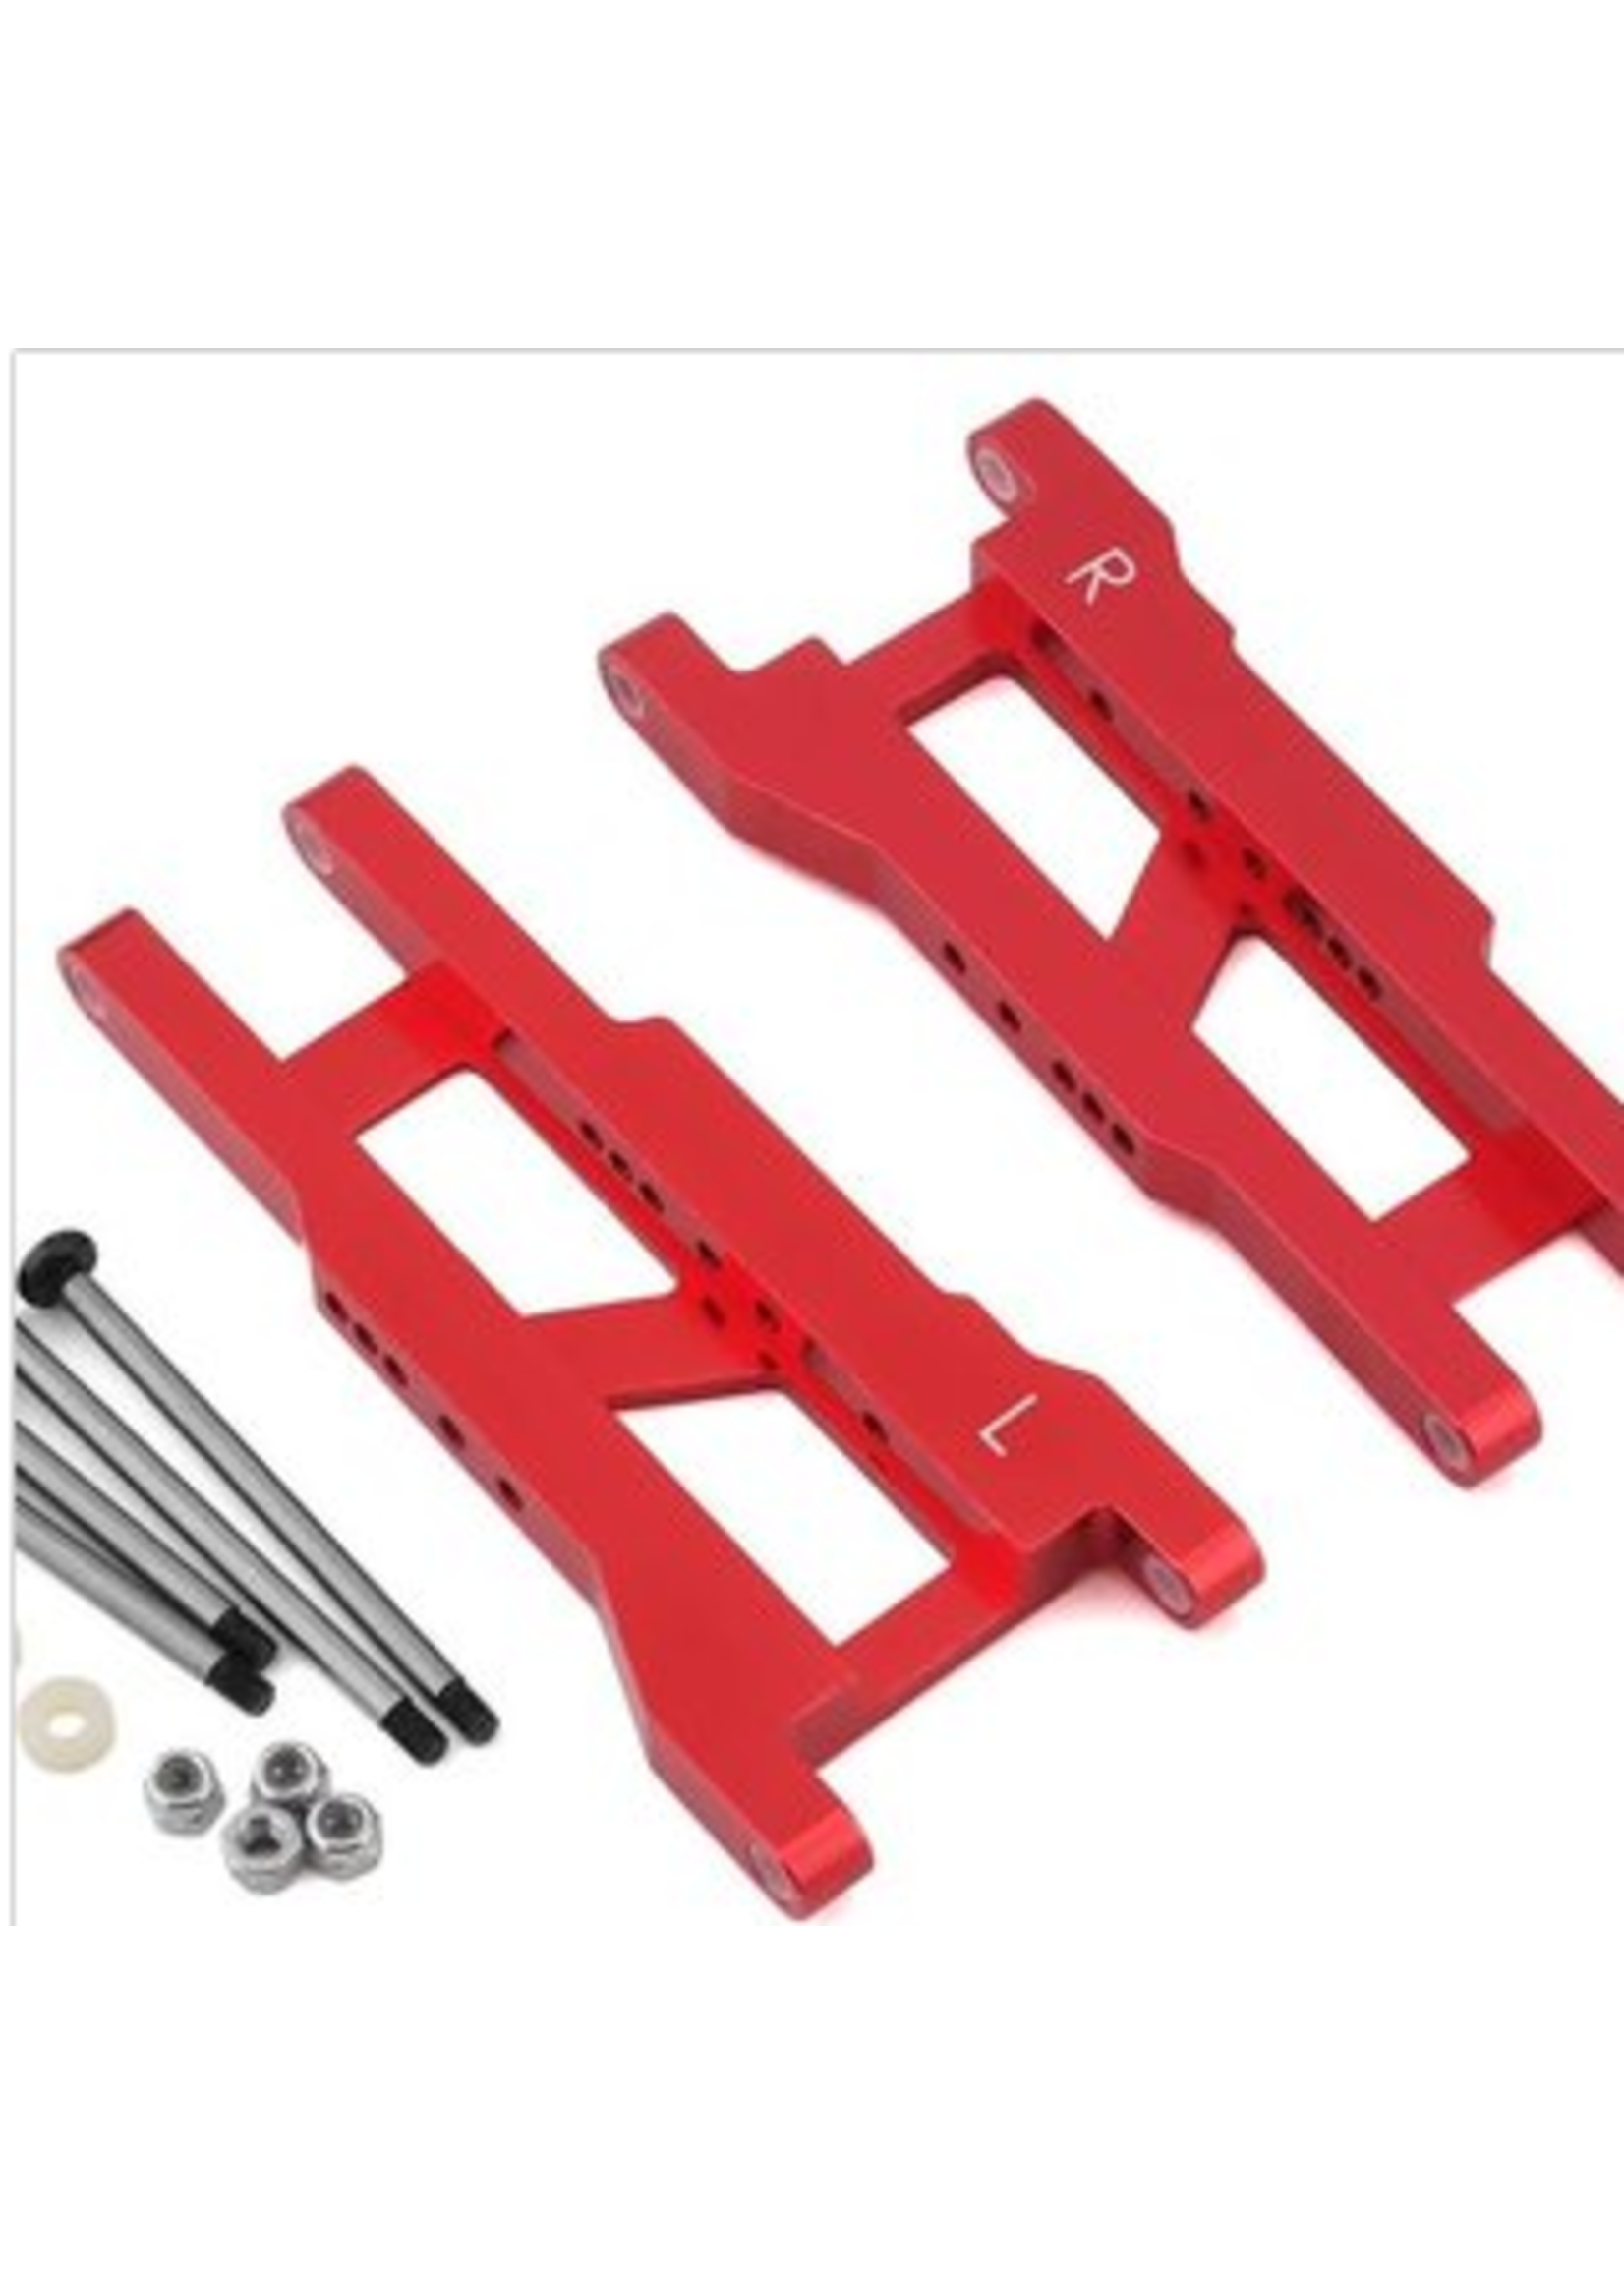 ST Racing Concepts SPTST3655XR ST Racing Concepts Heavy Duty Rear Suspension Arm Kit w/ Lock-Nut Hinge-Pins for Traxxas Rustler/Stampede 2WD (Red)